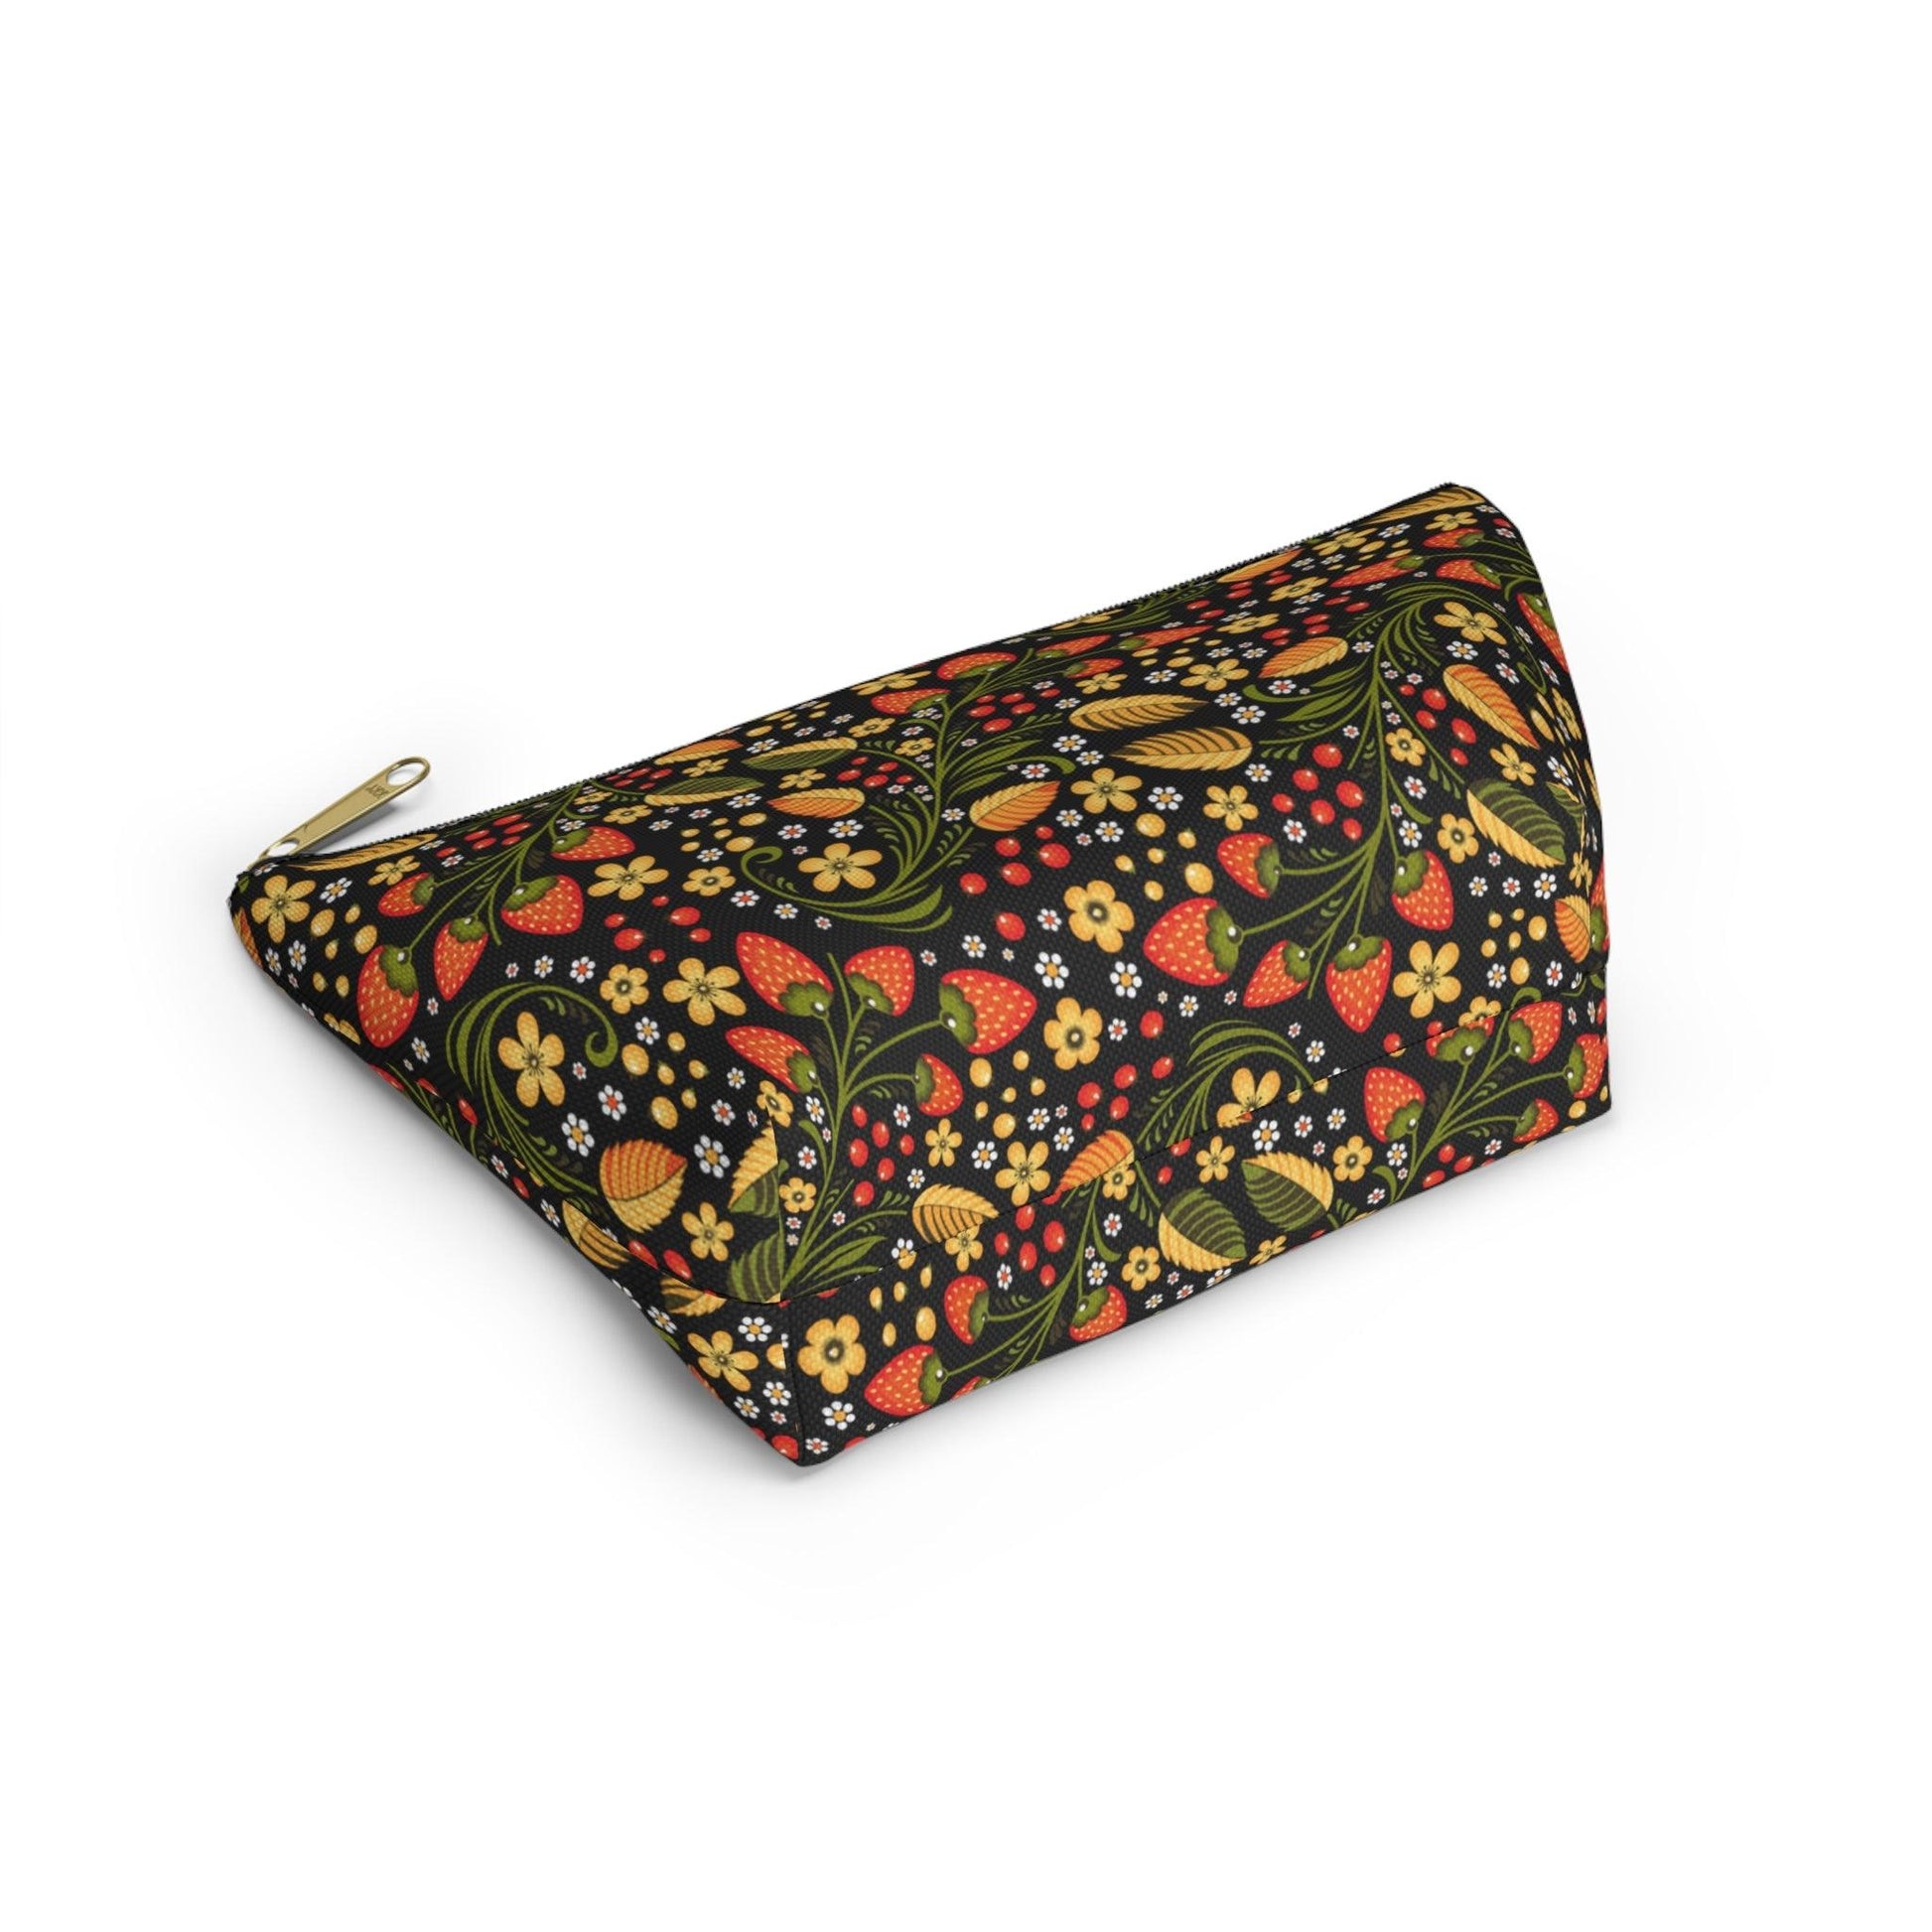 Russian Khokhloma Pouch - The Global Wanderer